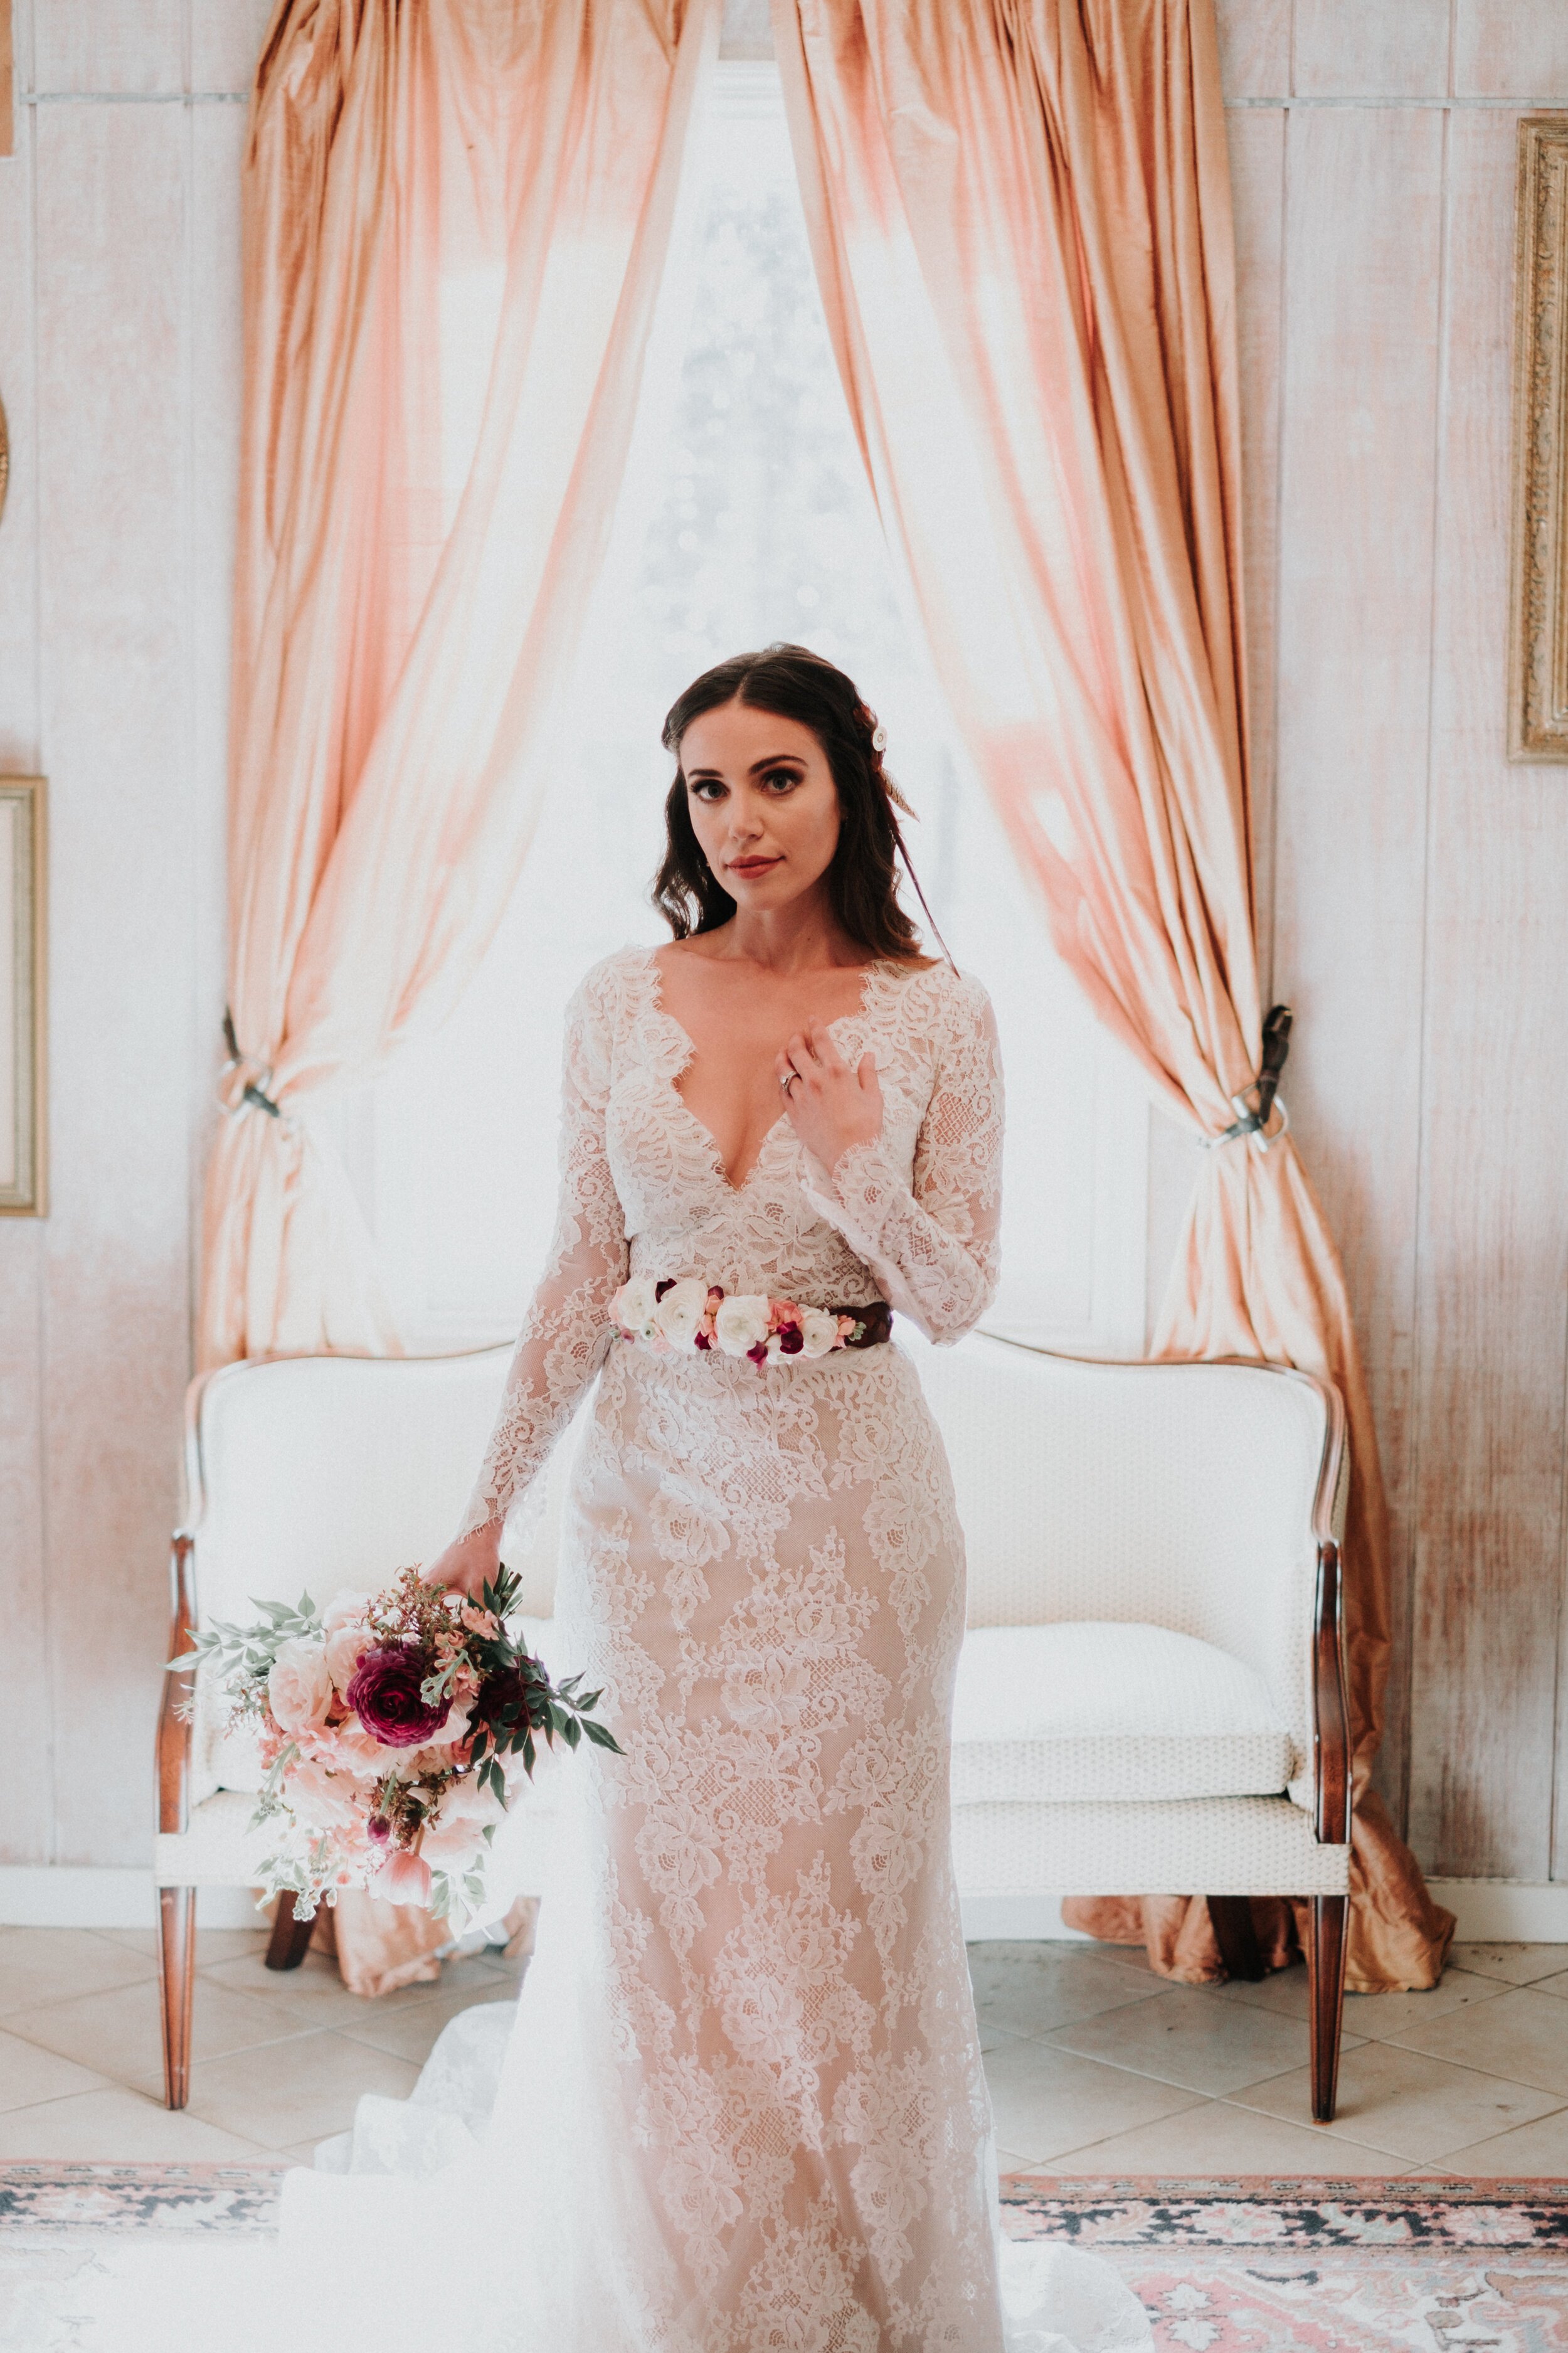 ivory-and-beau-blog-featured-in-south-magazine-bridal-shop-bridal-boutique-wedding-dresses-bridal-gown-wedding-gown-styled-shoot-photo-shoot-wedding-inspiration-Swamp Fox Farms  (21 of 101).jpg